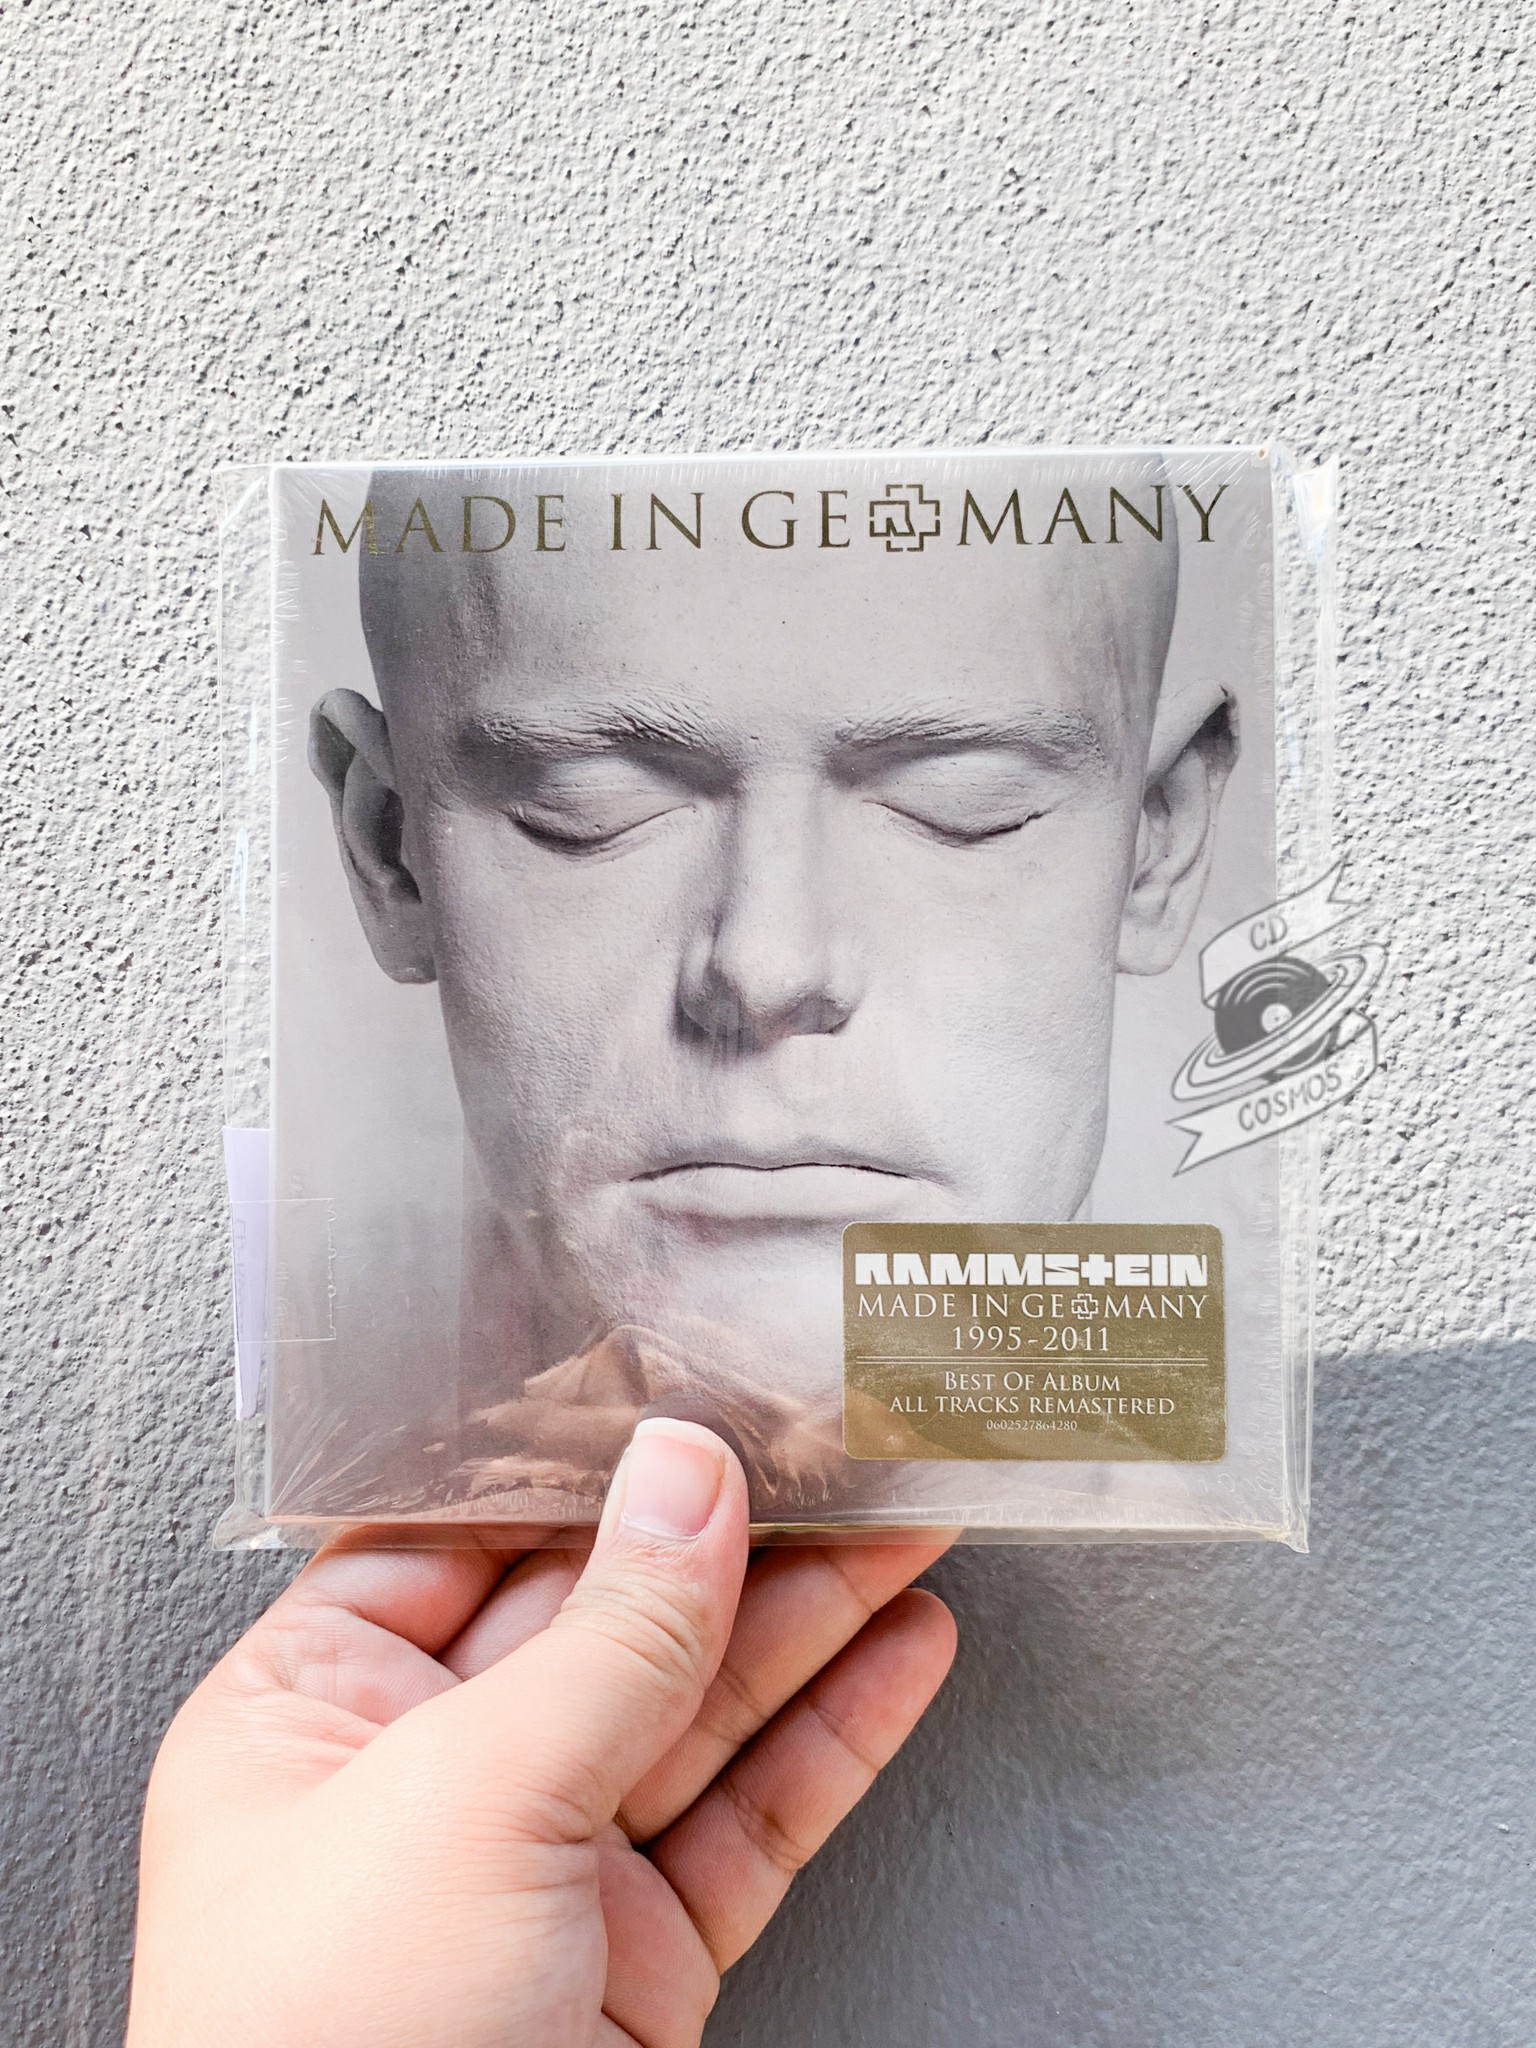 Rammstein - Made In Germany (1995-2011) - cdcosmos